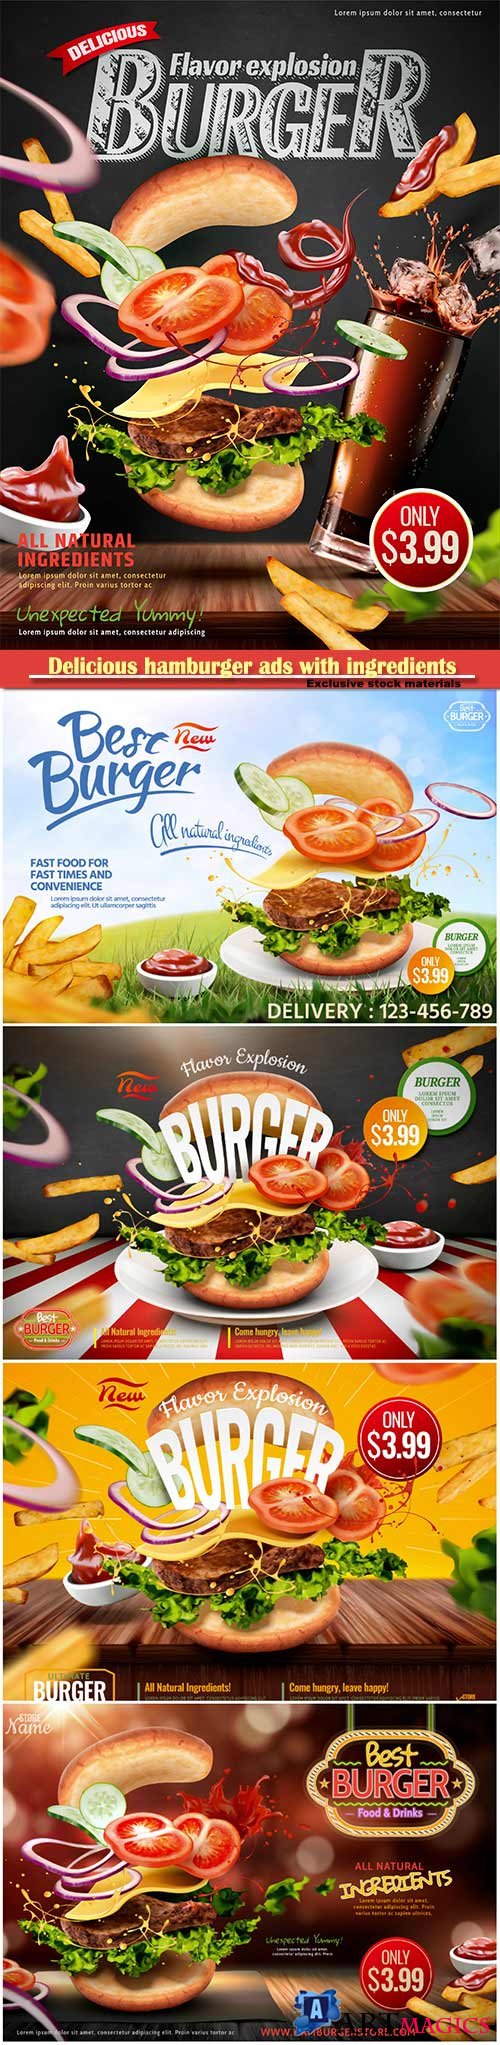 Delicious hamburger ads with ingredients flying in the air on chalkboard background in 3d illustration